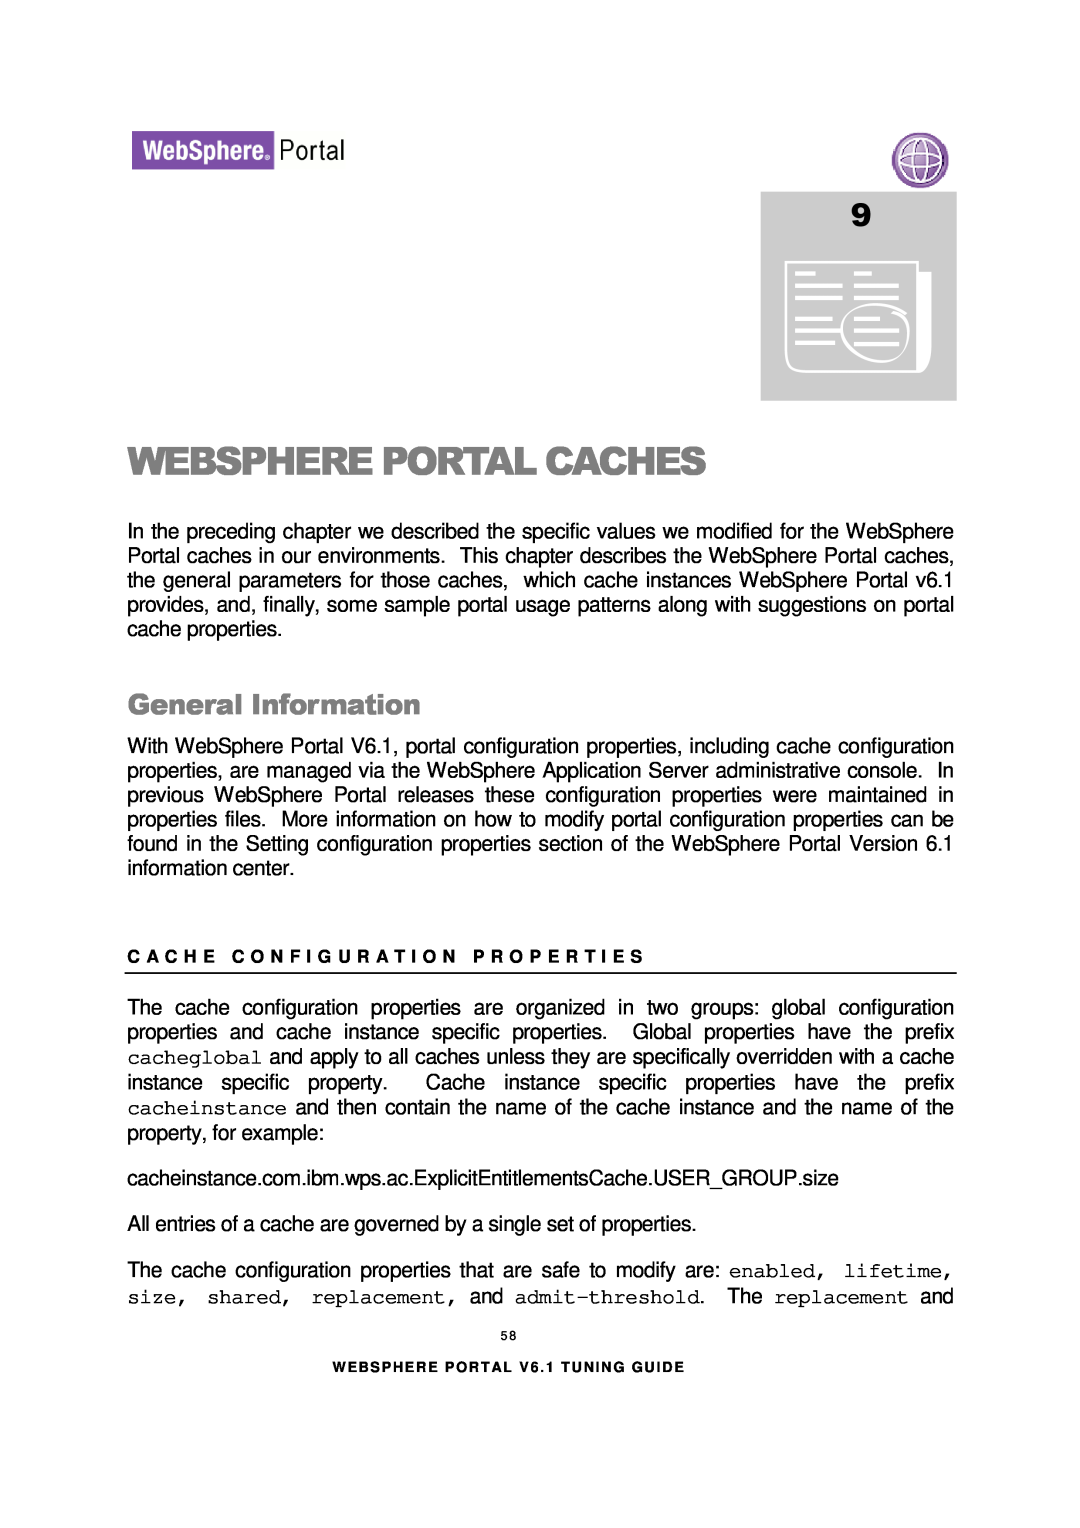 IBM 6.1.X manual Websphere Portal Caches, General Information 